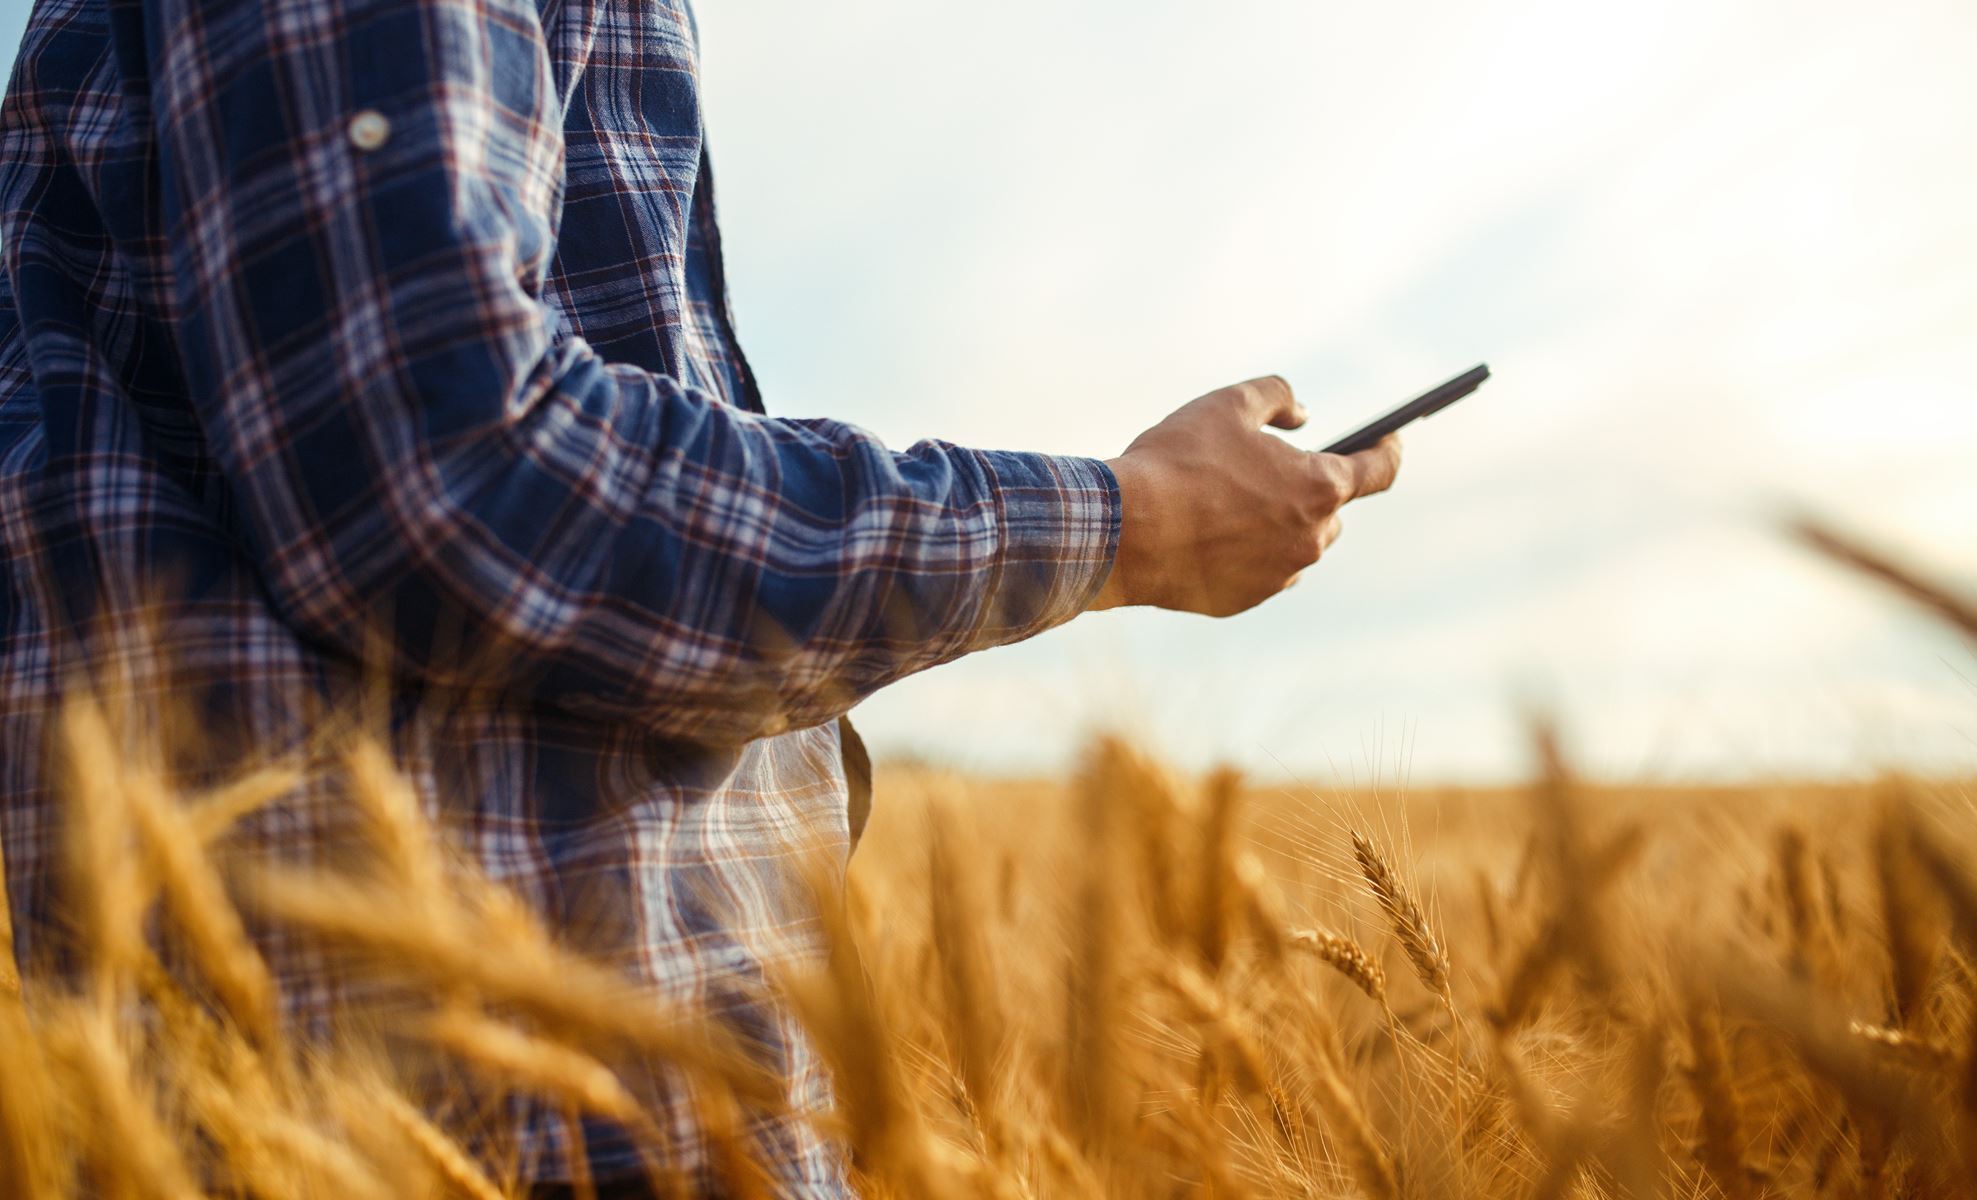 Man standing in wheat field holding and looking at a cell phone